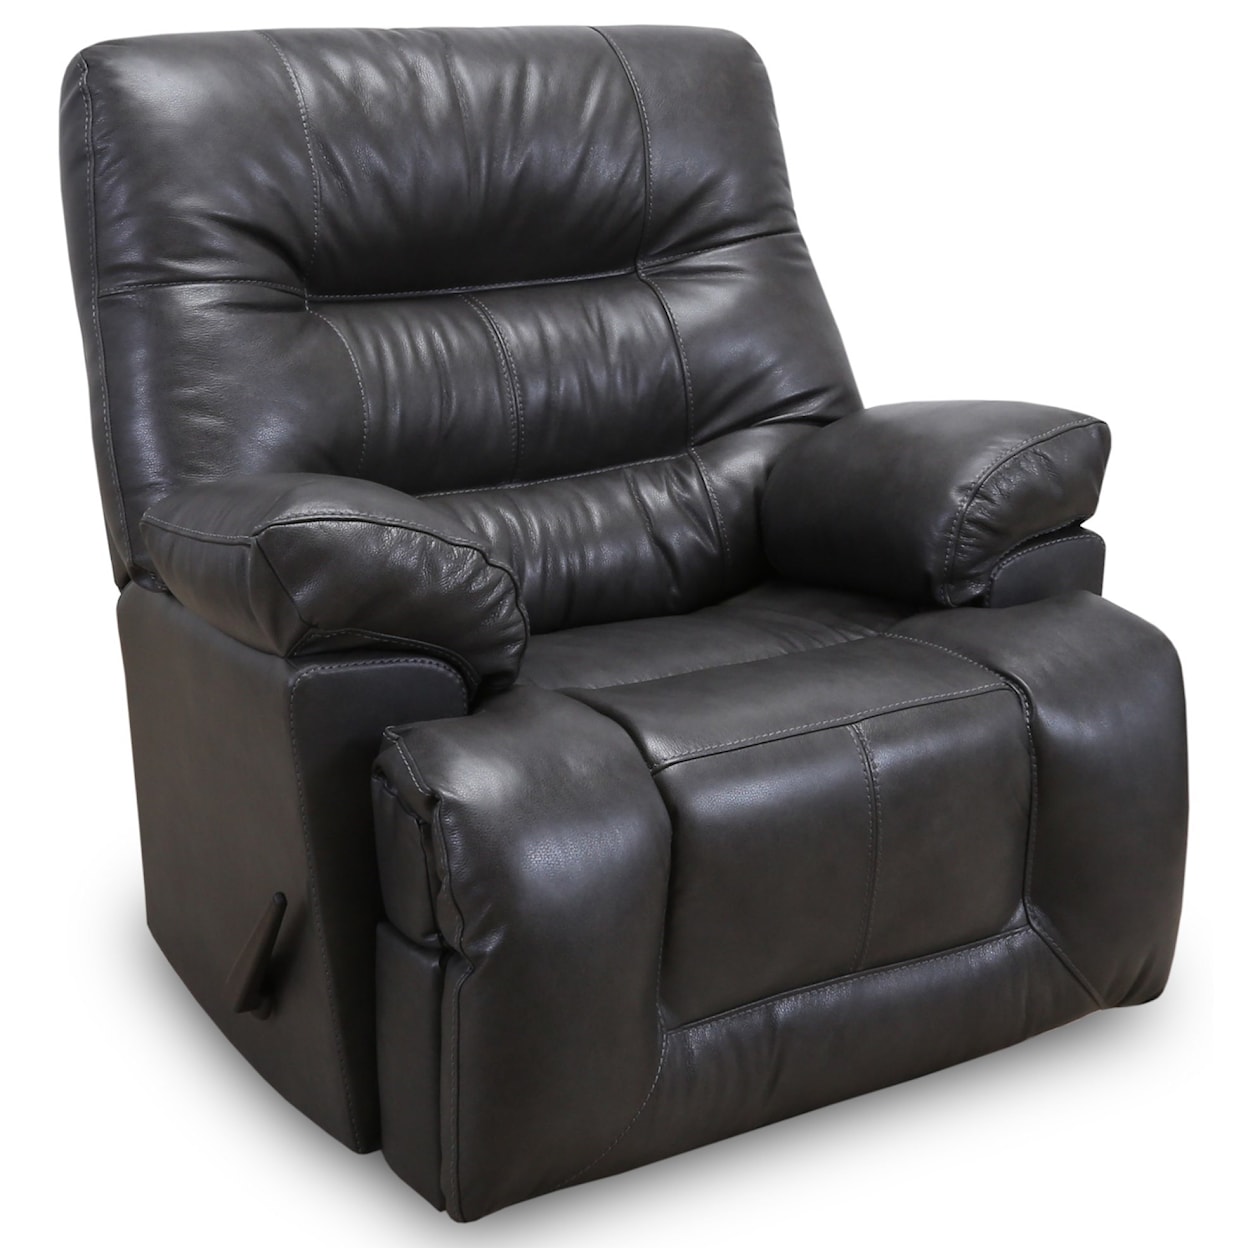 Franklin Franklin Recliners Boss Power Lay Flat Recliner with USB Port